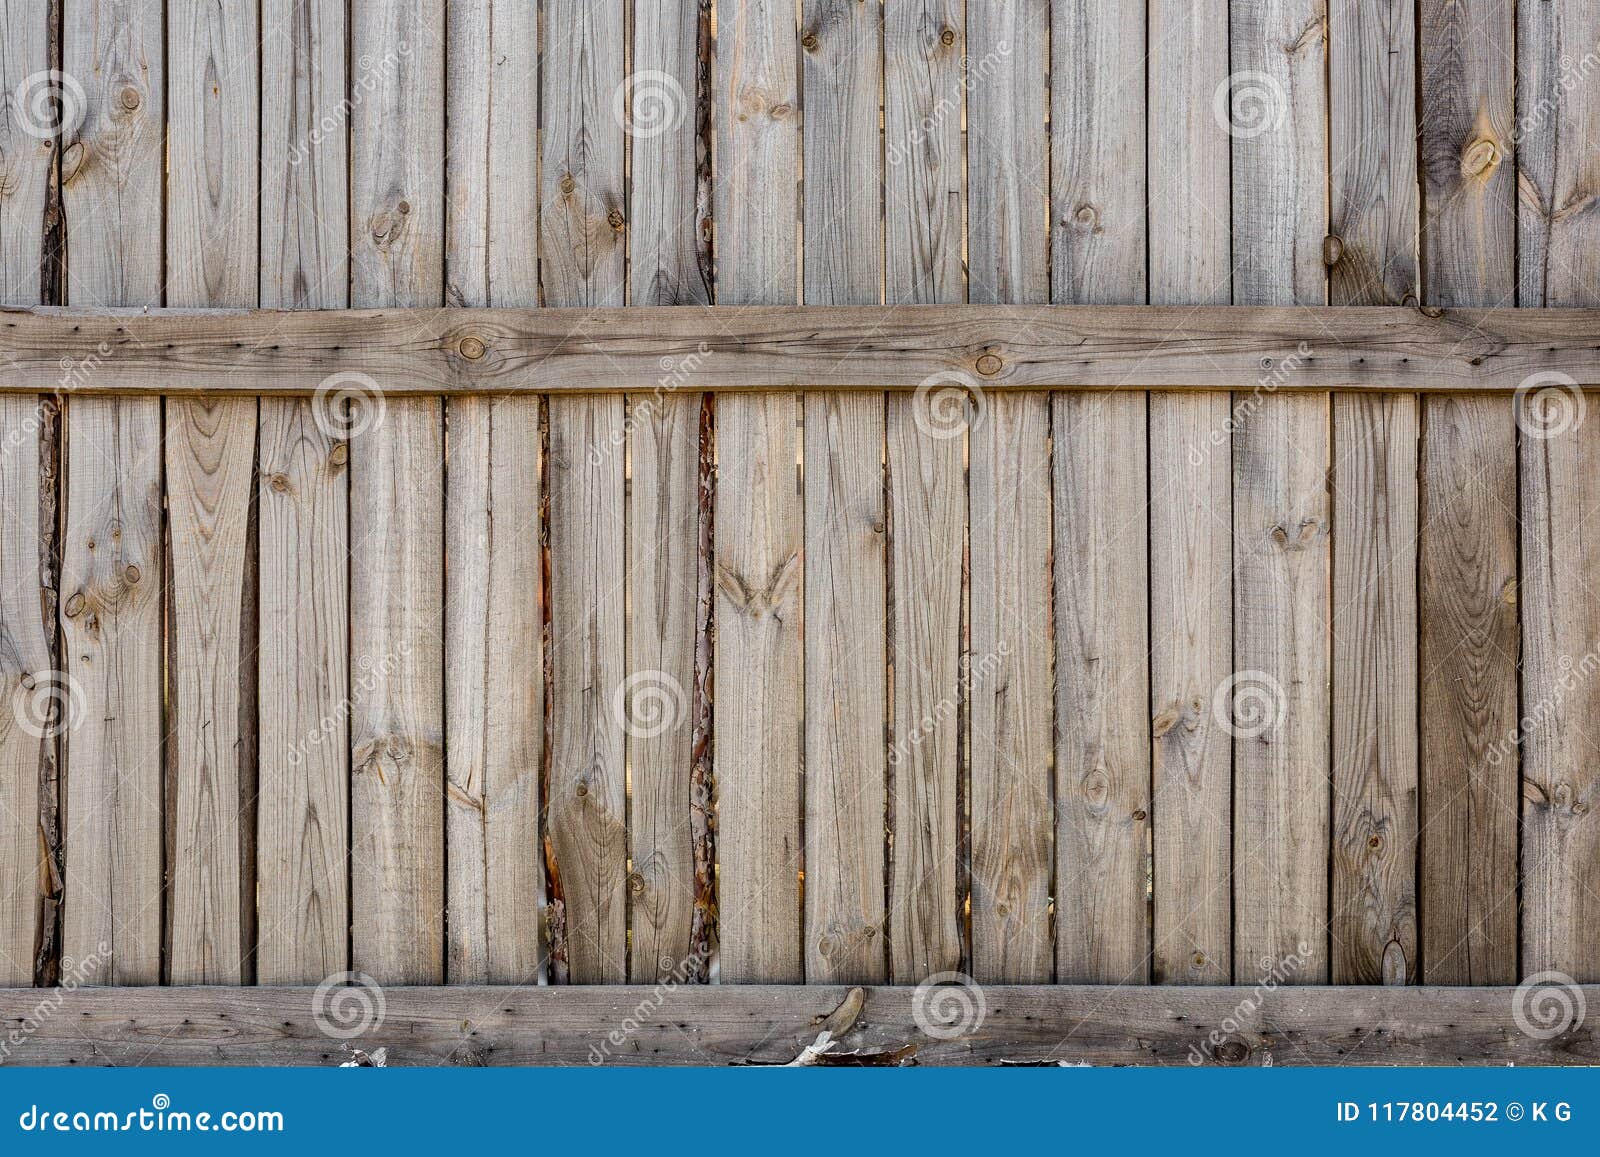 close-up of vertical simple oak wooden fence background. old knotted timber wall. vintage rustic pattern. copyspace